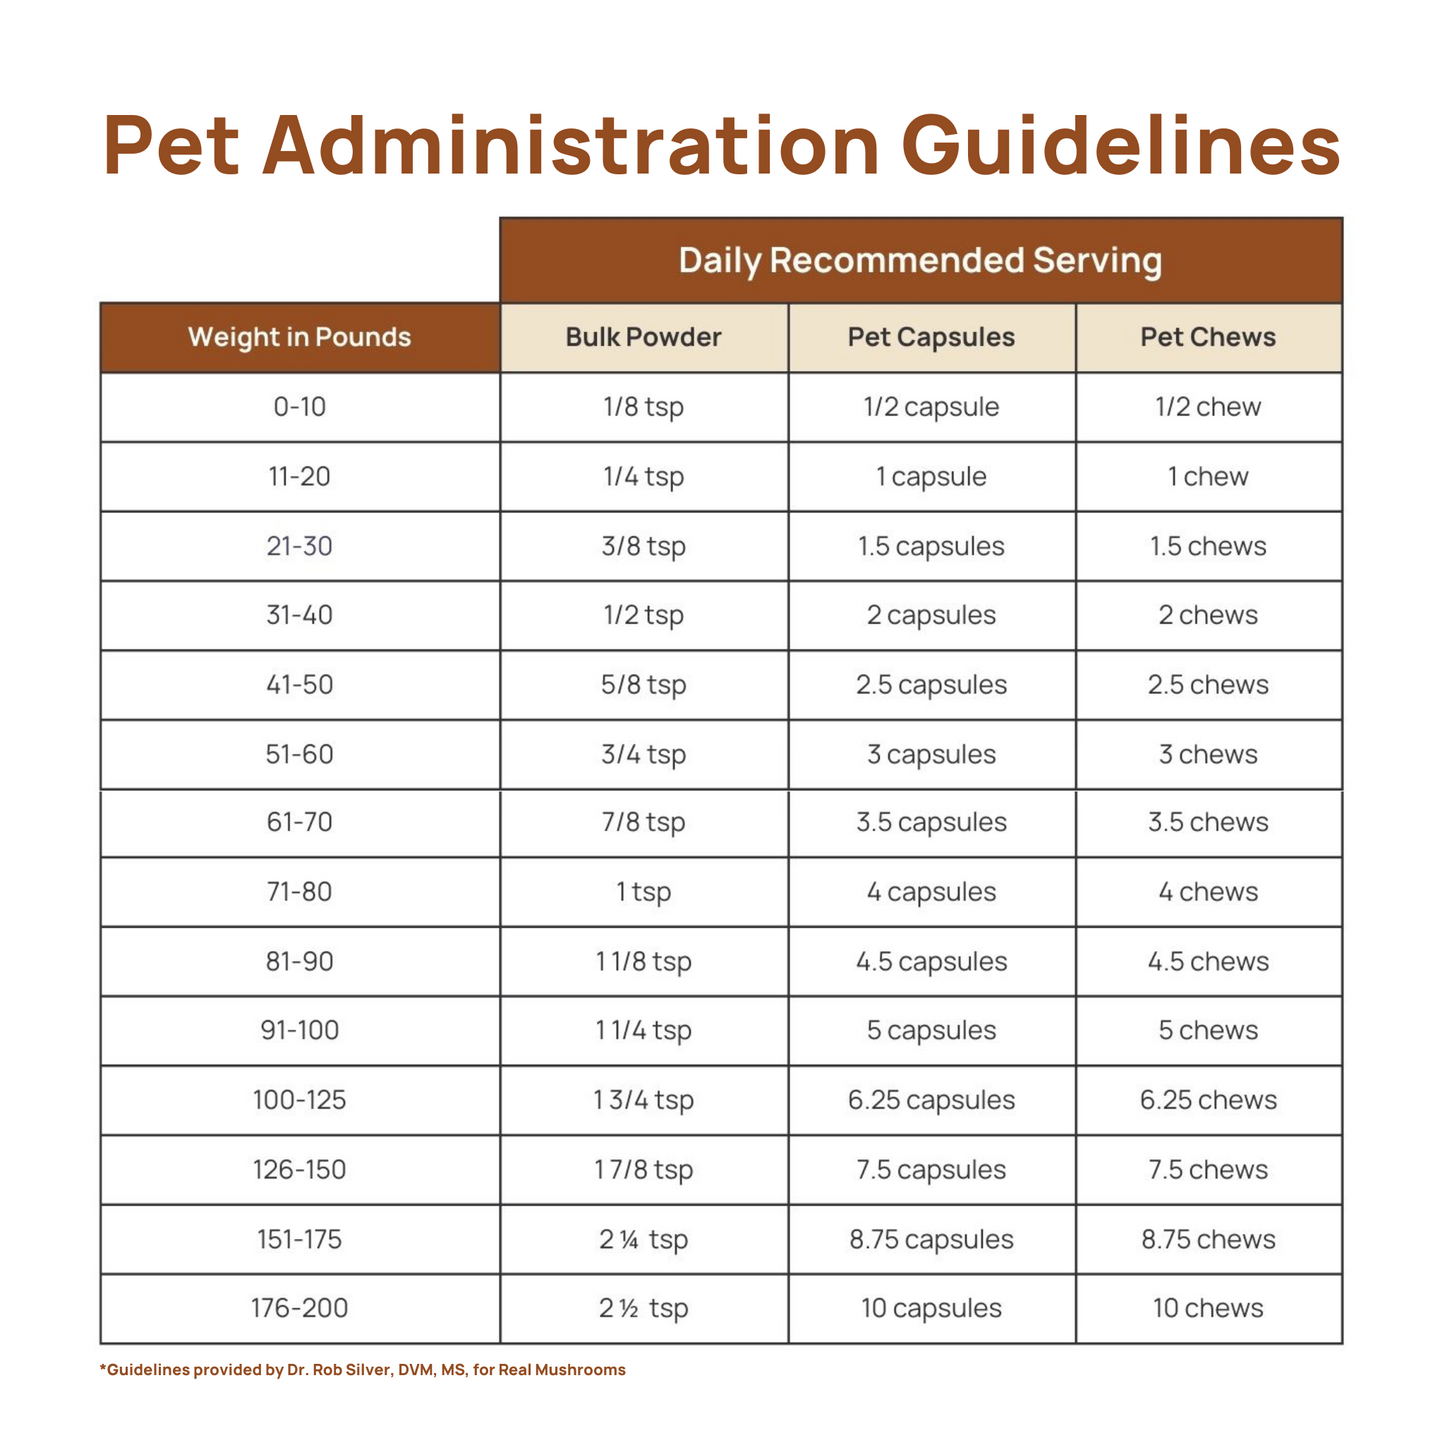 Certified organic Real Mushrooms pet administration guidelines incorporating Turkey Tail Extract Capsules for Pets and their beneficial beta-glucans.